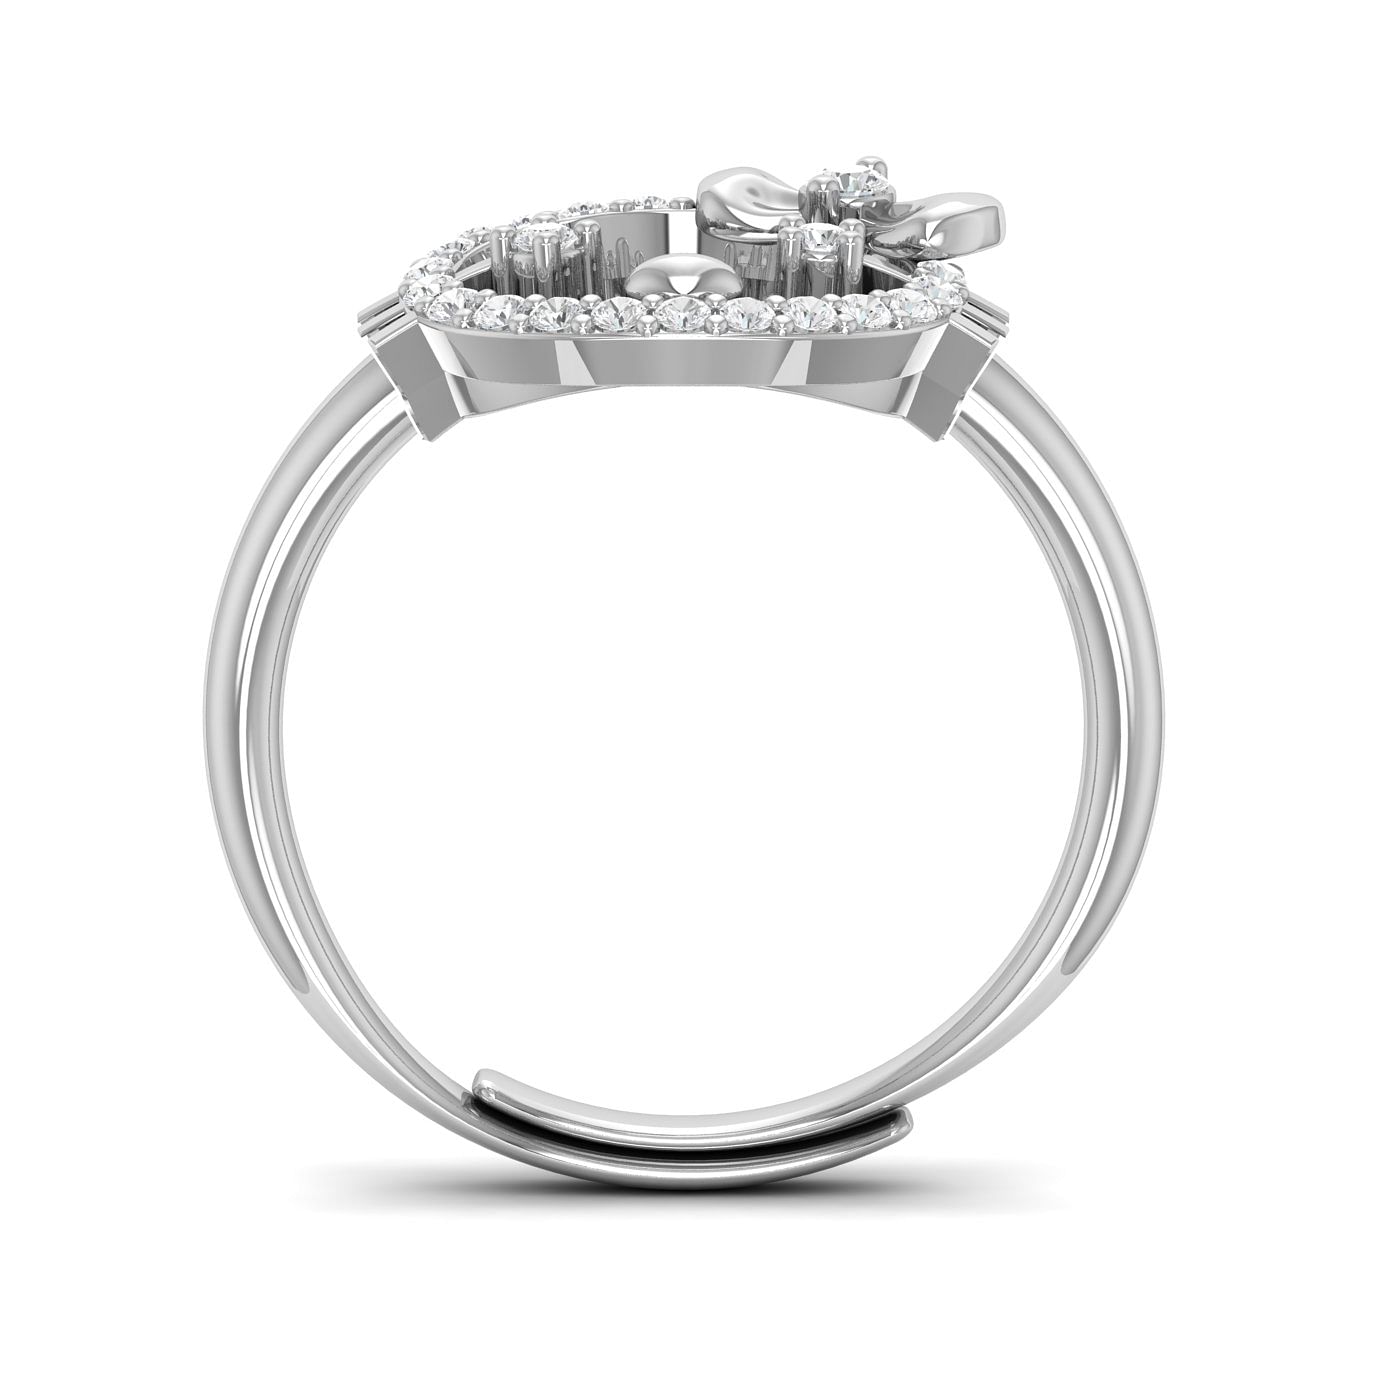 Stylish Modern Fancy Classic Diamond Ring With White Gold For Gift